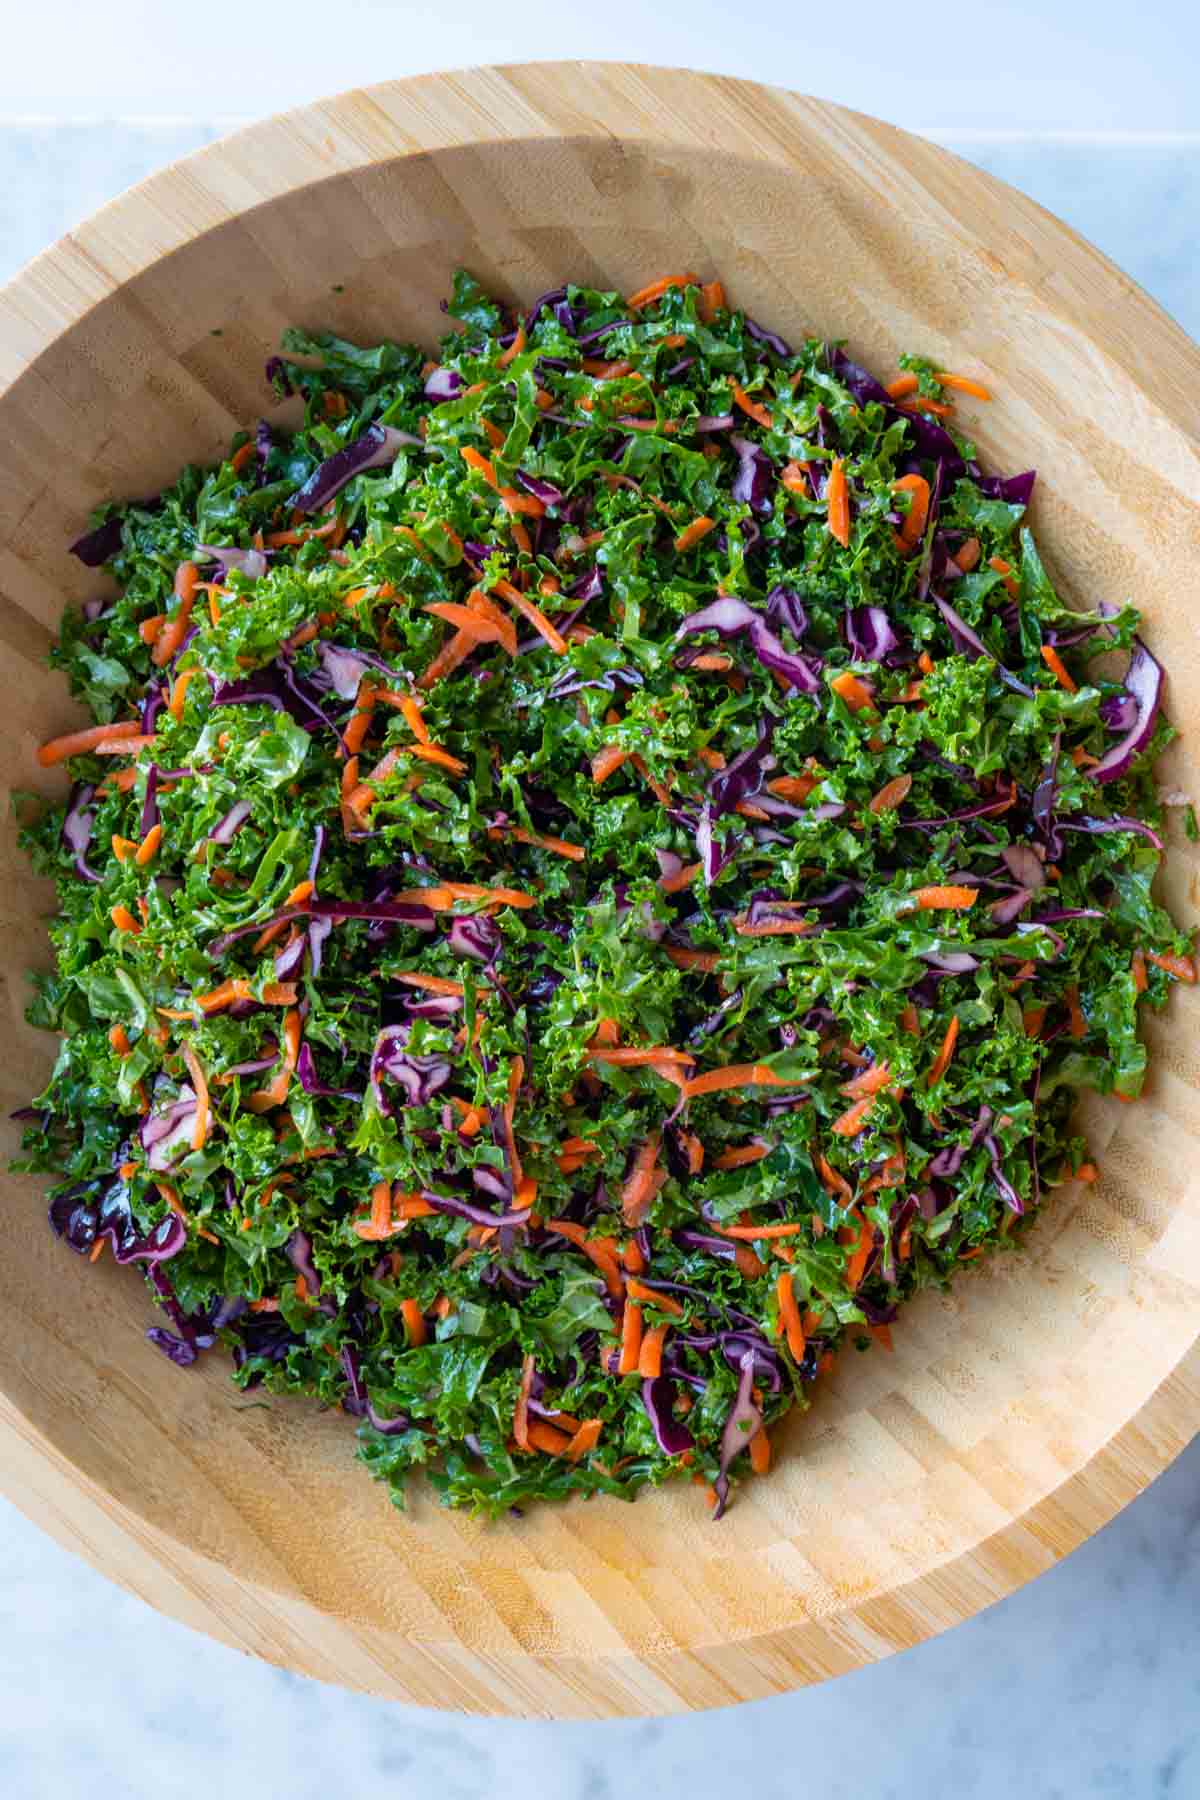 Sliced red cabbage, kale, and shredded carrots, tossed in oil dressing, in a large wooden bowl.